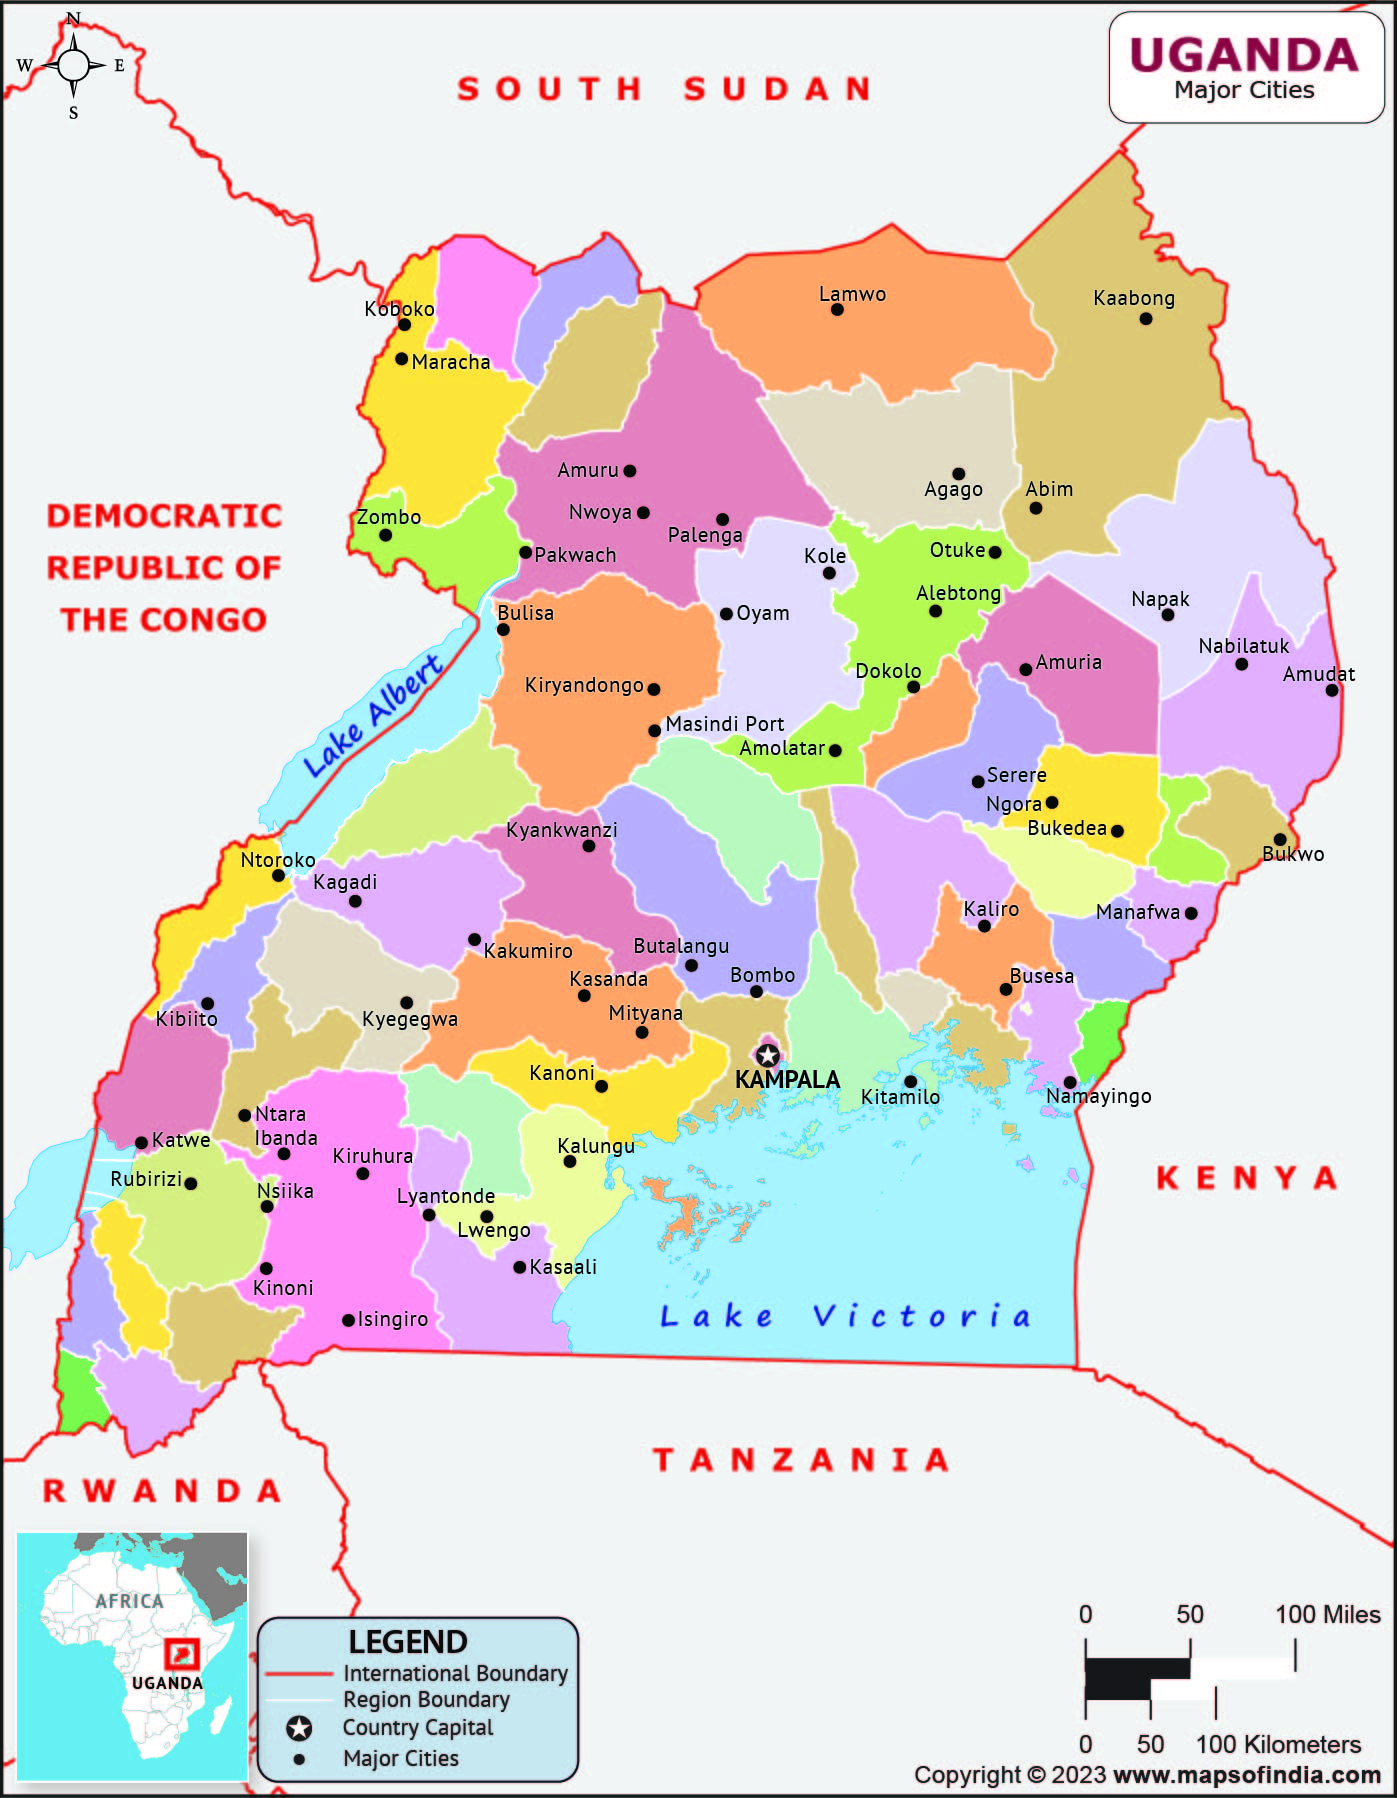 Uganda Major Cities Map | List of Major Cities in Different States of ...